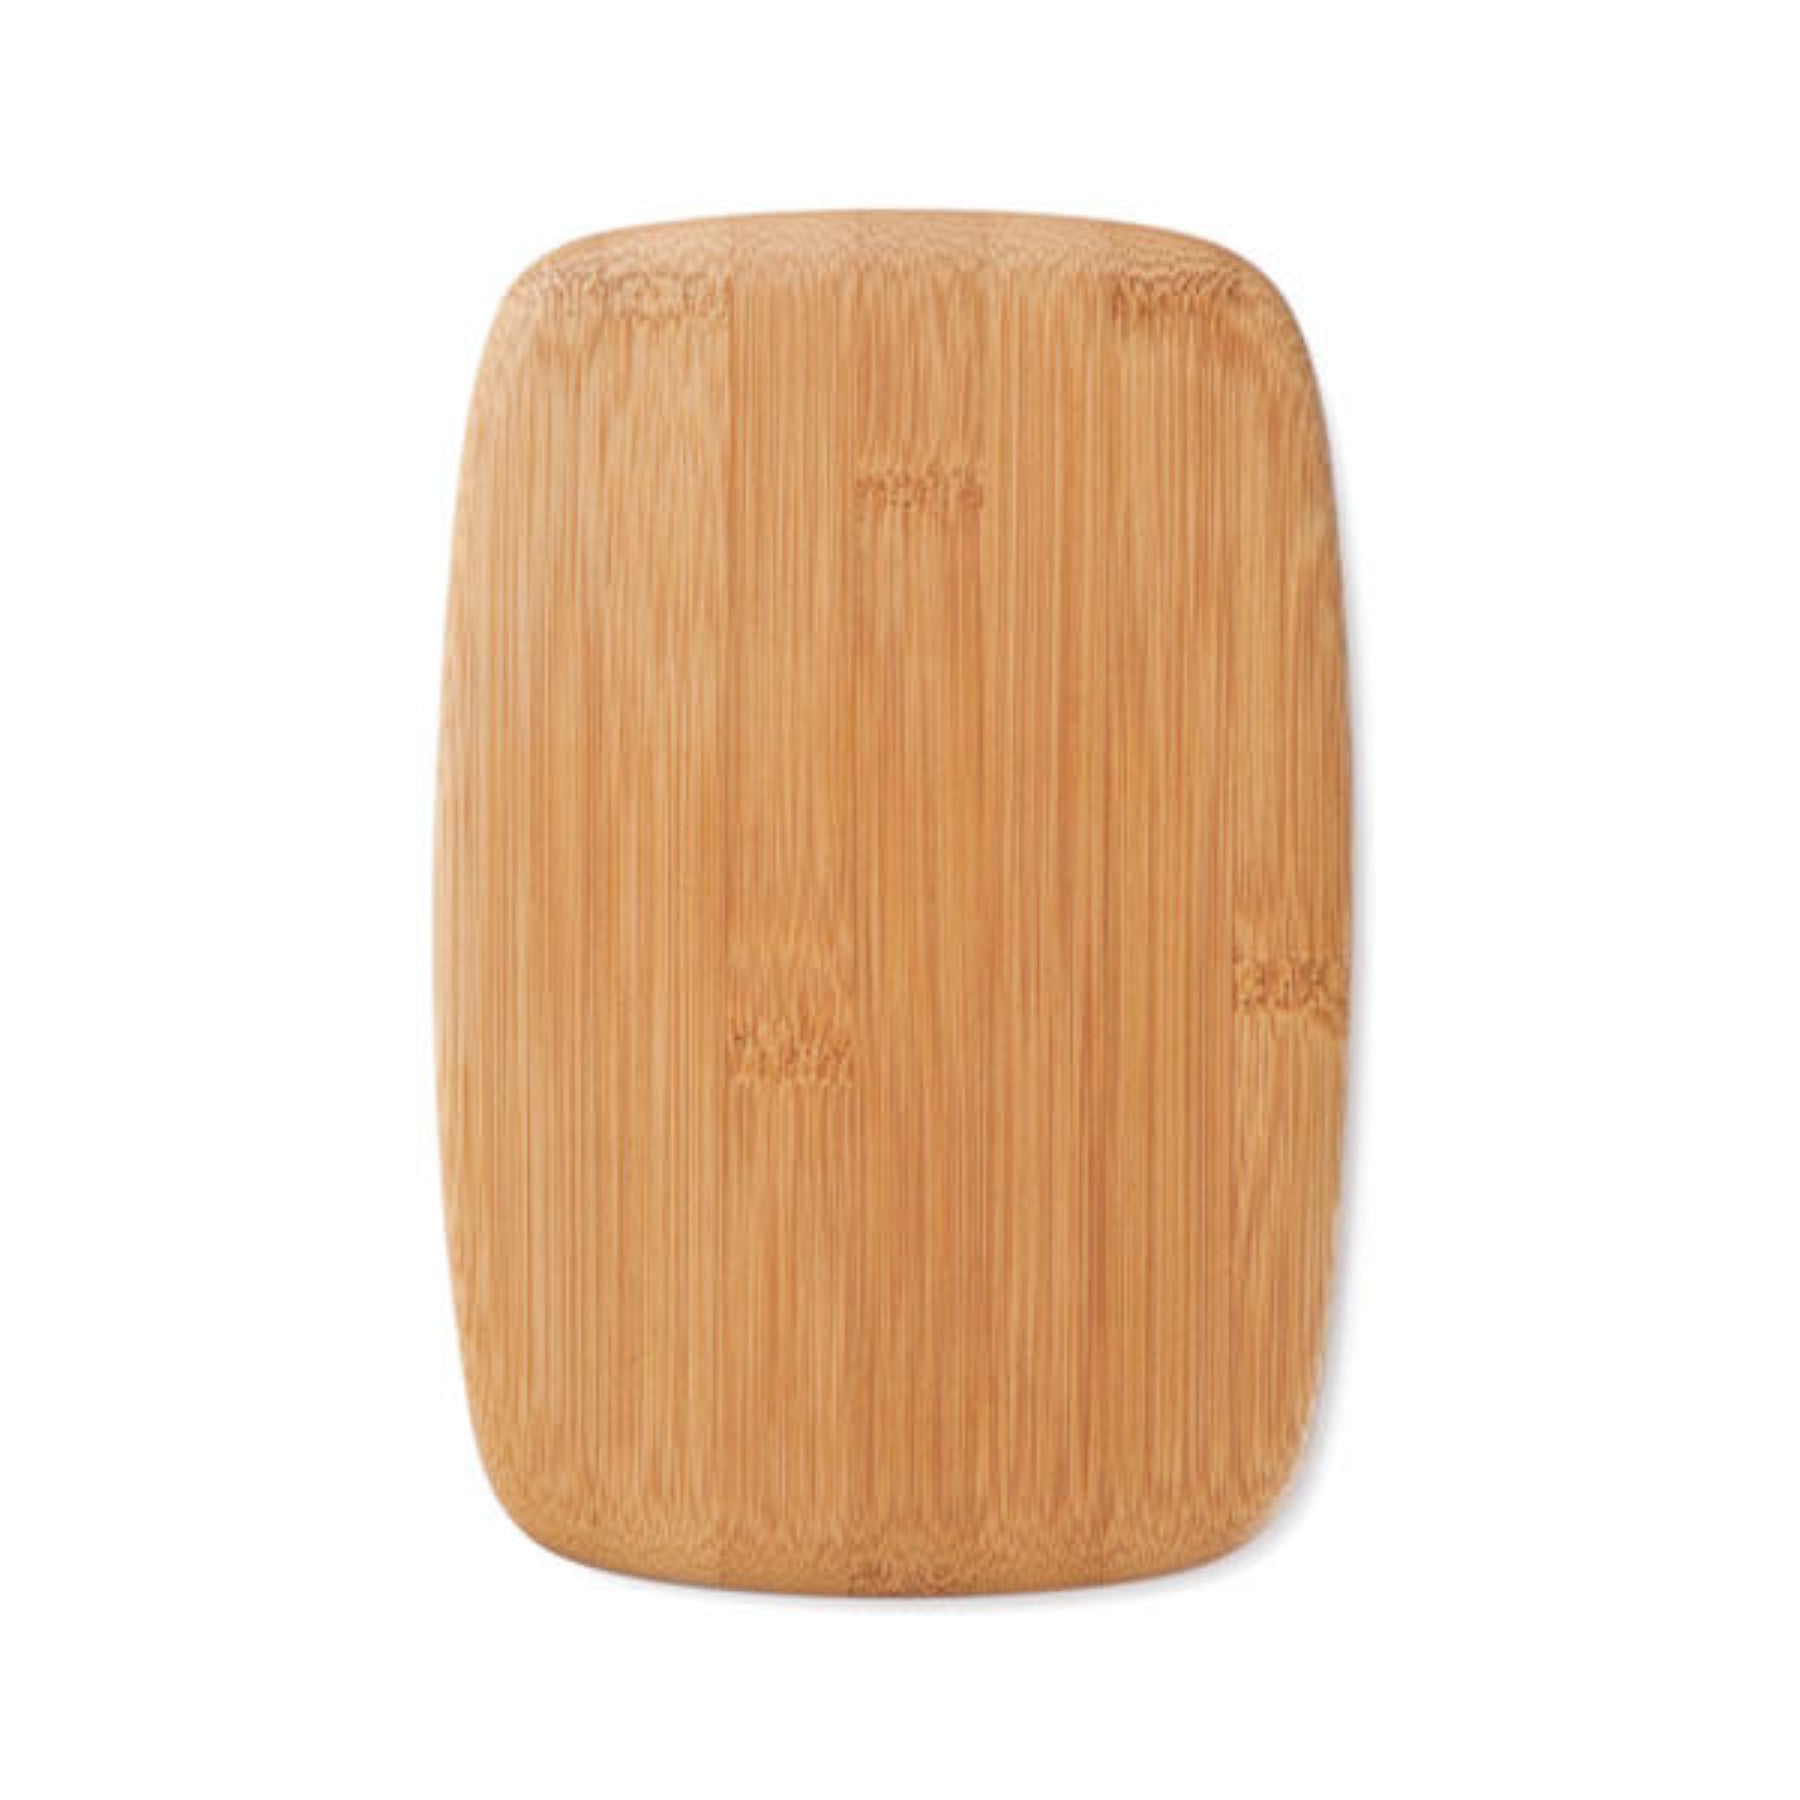 Bamboo cutting board, rectangular, wooden texture, sustainable kitchenware, natural material food prep surface, eco-friendly chopping block.